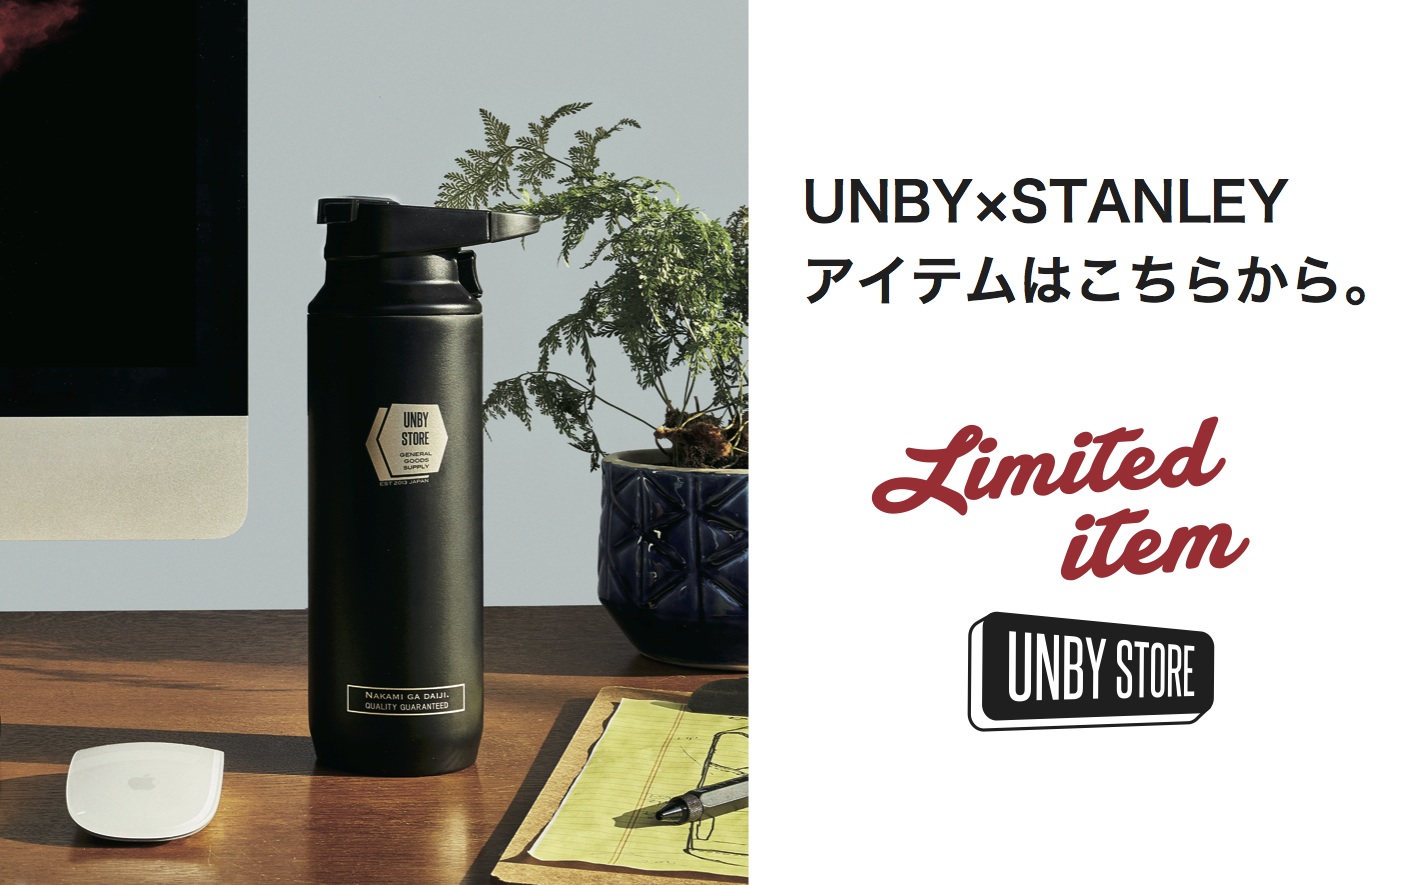 STANLEY 旧ロゴアイテム | UNBY ONLINE STORE